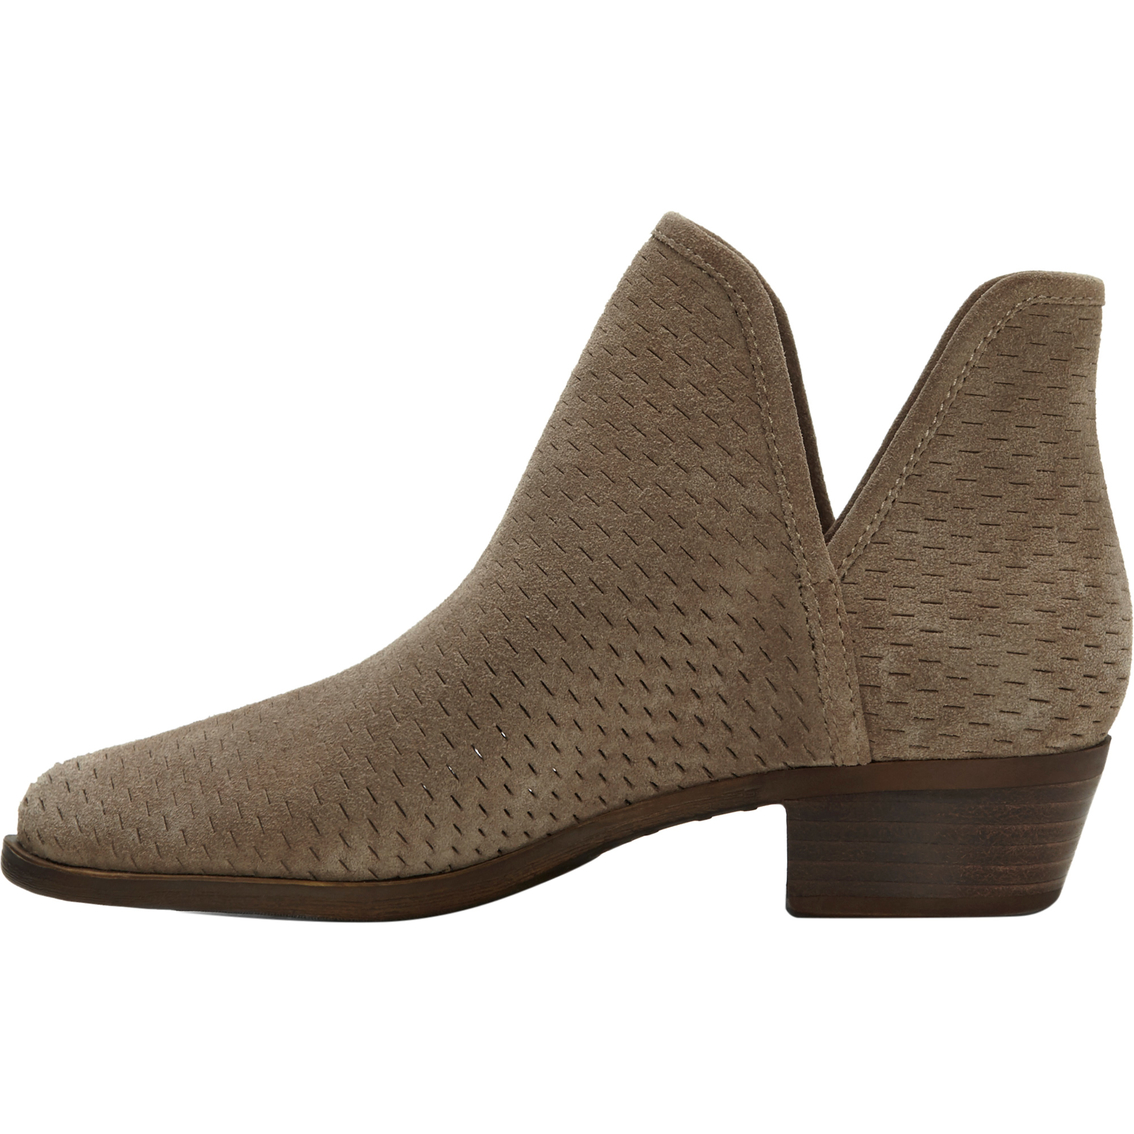 Lucky Brand Baley Dip Side Booties - Image 2 of 5